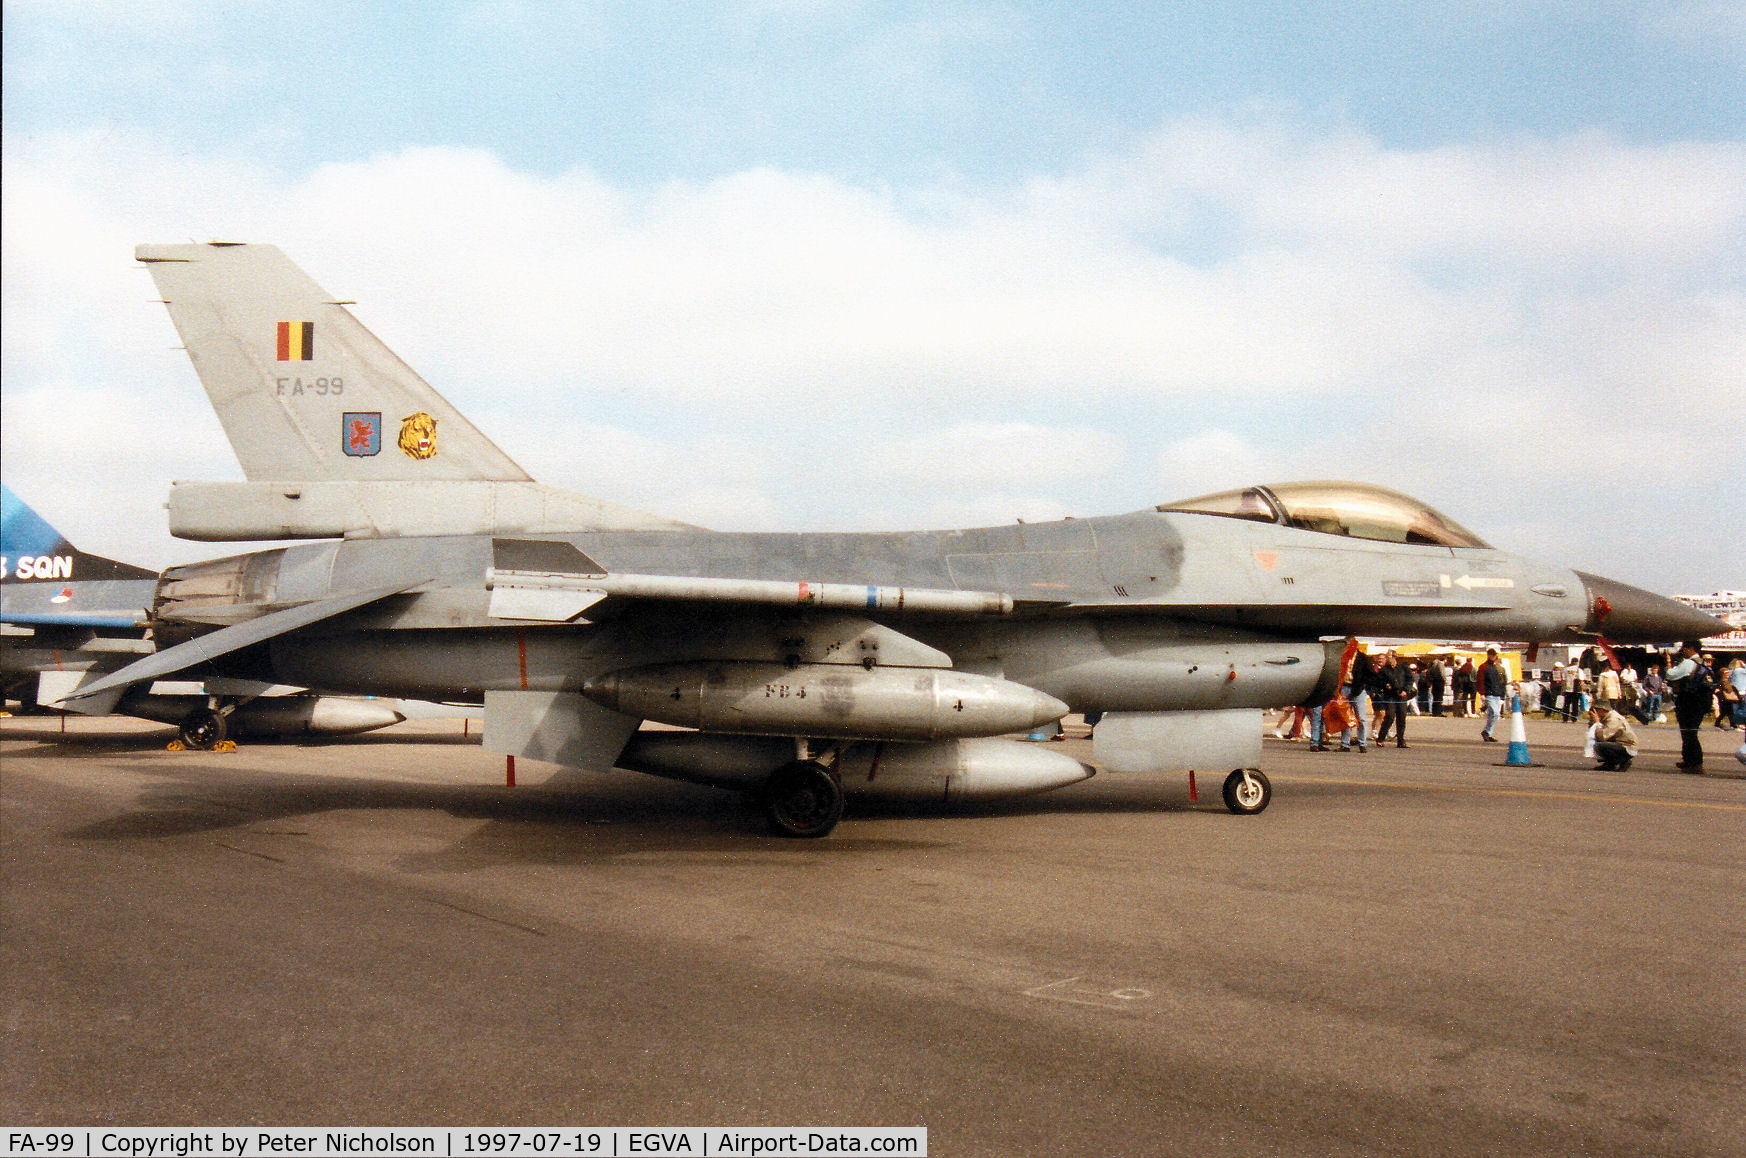 FA-99, SABCA F-16AM Fighting Falcon C/N 6H-99, F-16A Falcon, callsign Belgian Air Force 431, of 31 Squadron on display at the 1997 Intnl Air Tattoo at RAF Fairford.